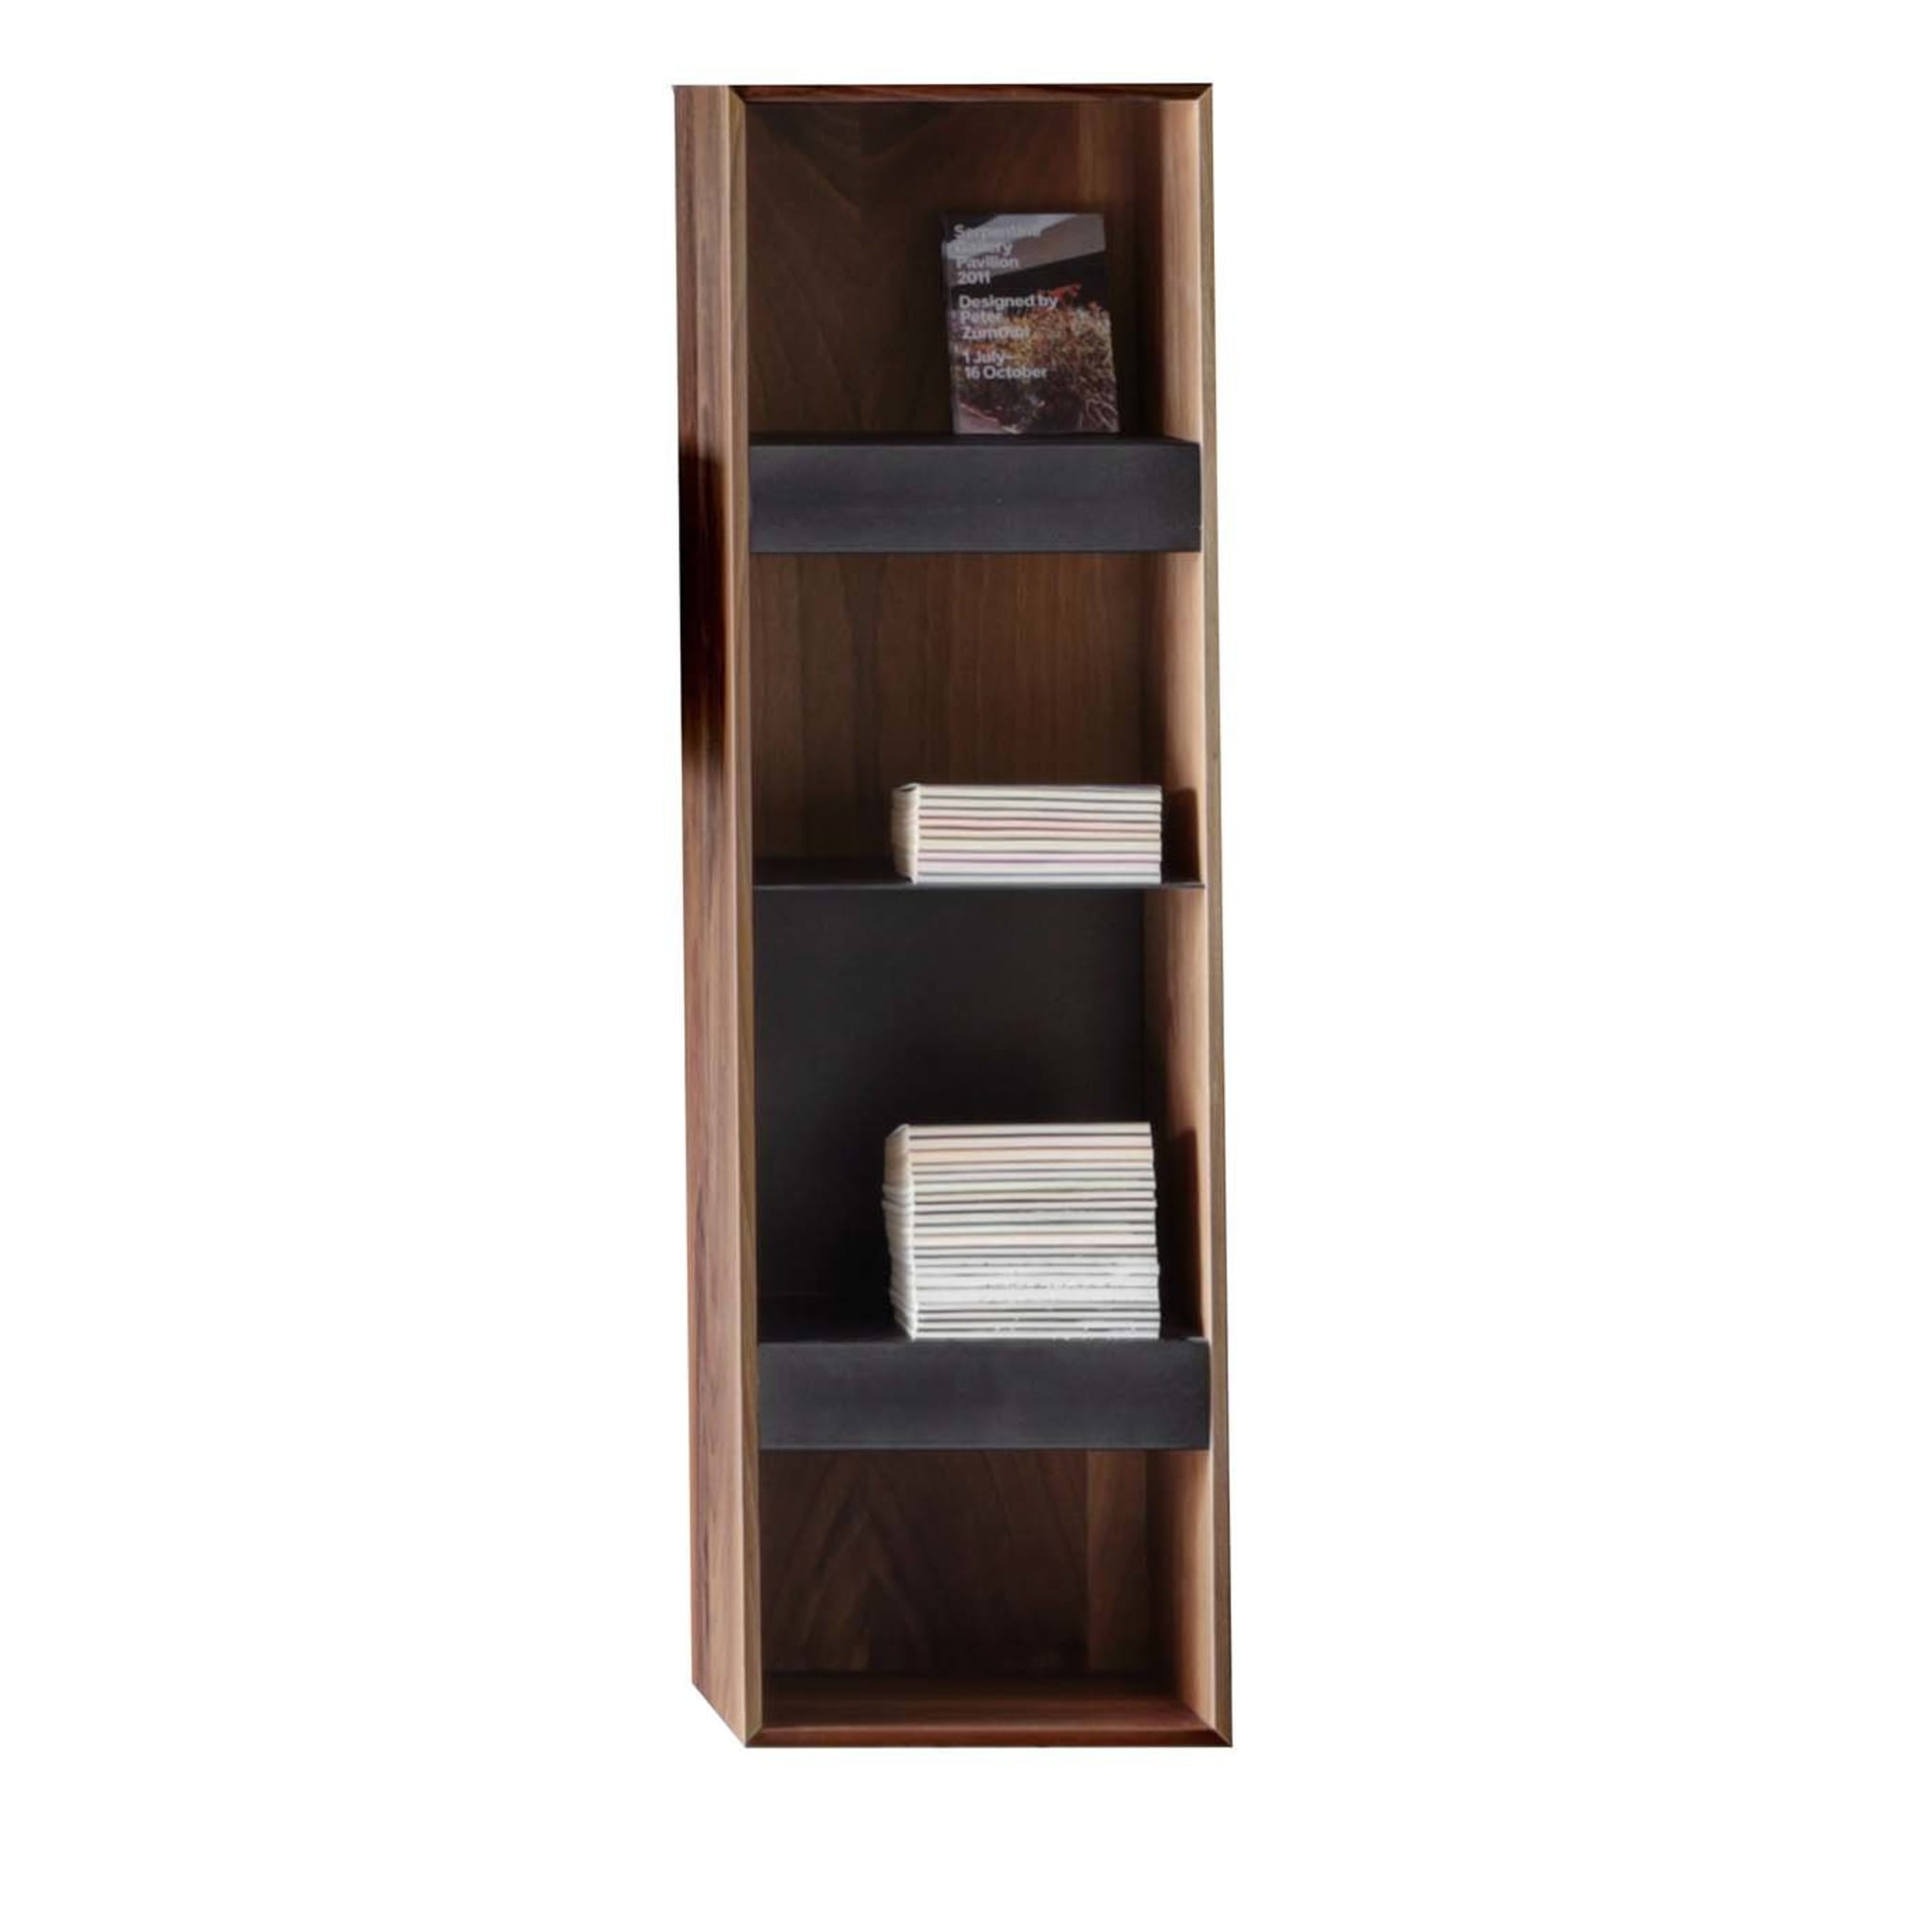 T Box Vertical Hanging Cabinet by Act_Romegialli - Main view